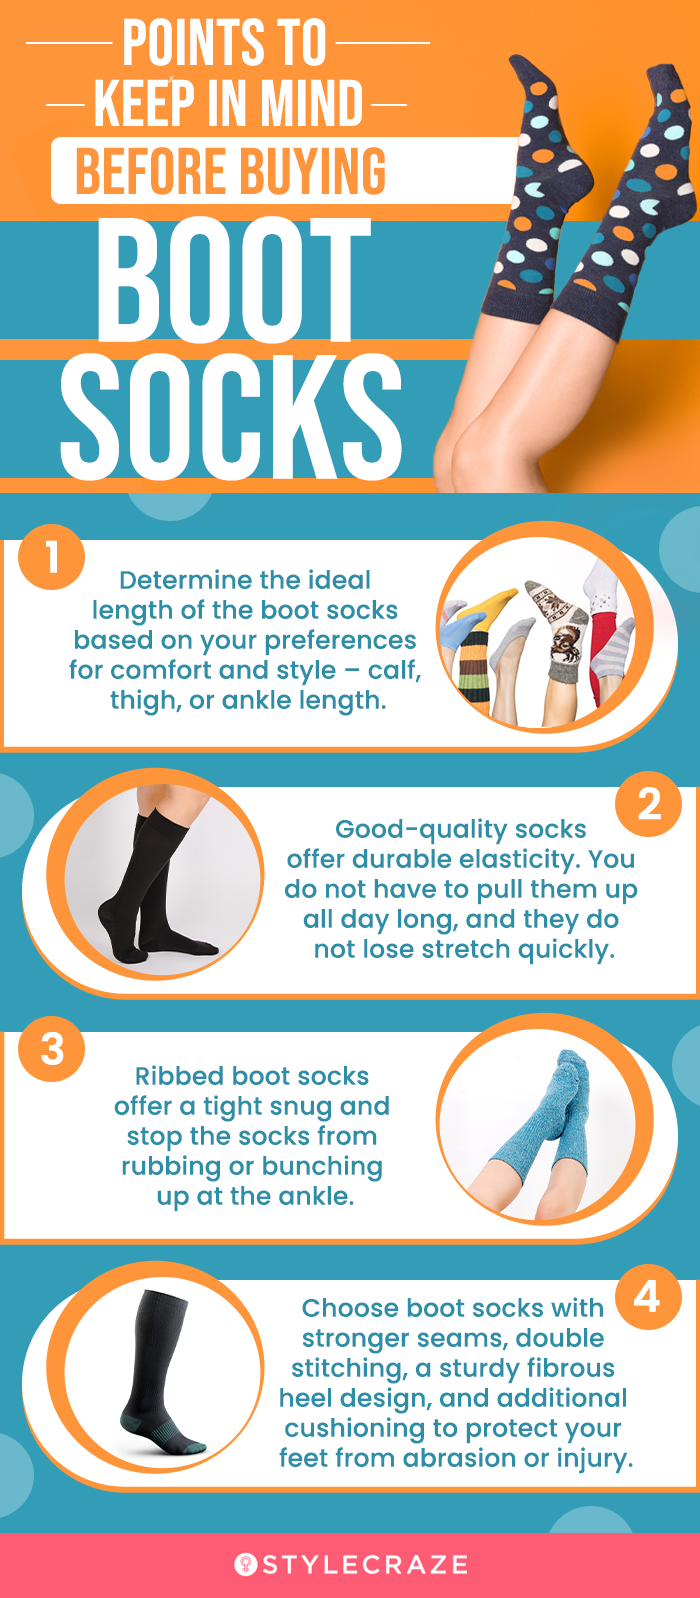 Points To Keep In Mind Before Buying Boot Socks